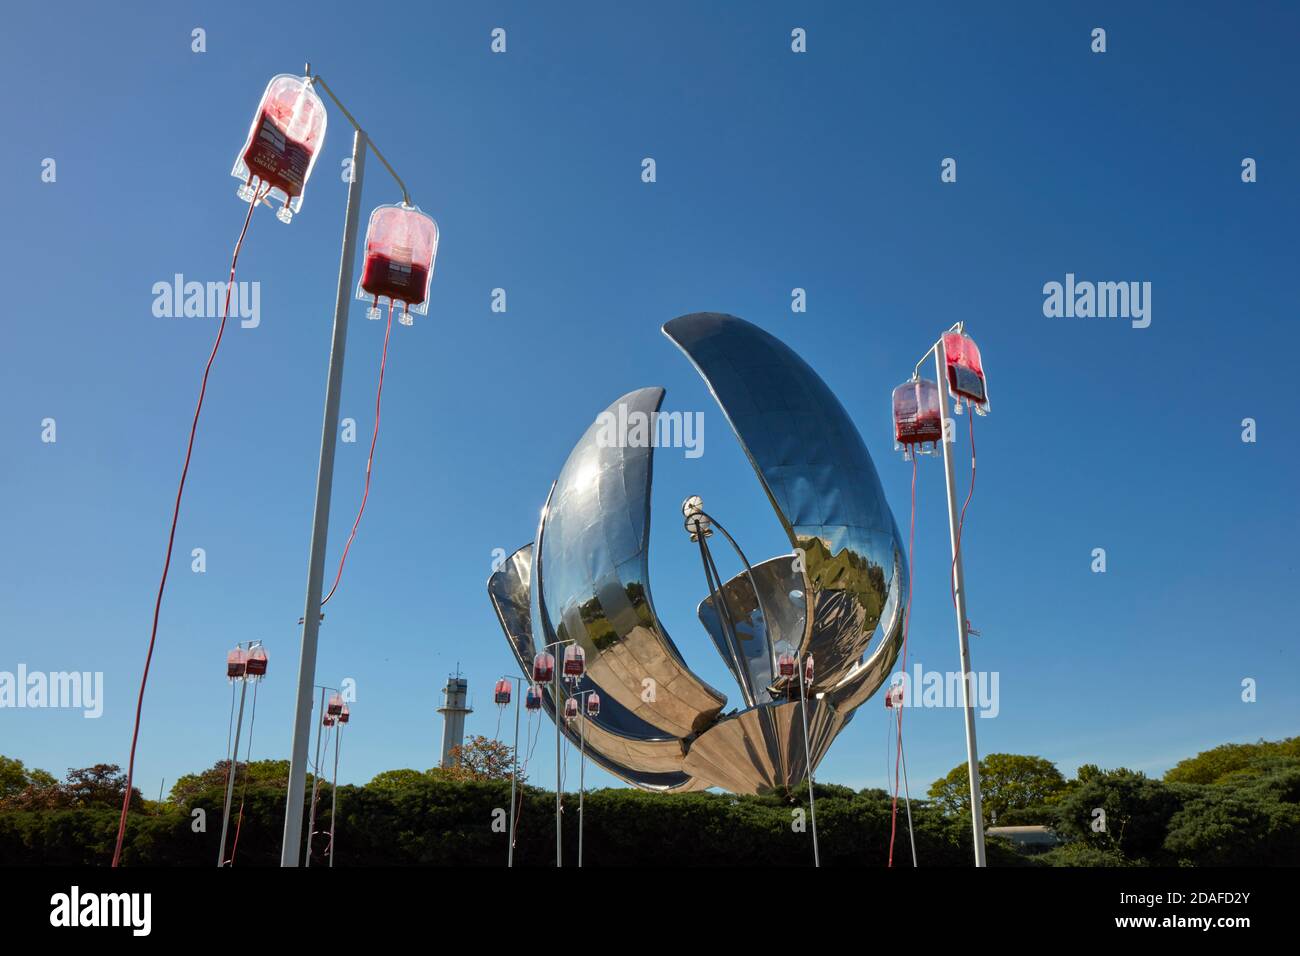 Buenos Aires, Argentina, 11th November 2020. Bags of blood in front of one of the symbols of the Argentine capital, the Floralis Generica monument. 'Alquimia' is a public exhibition of the Argentine contemporary artist Marcelo Toledo set up on the occasion of the 'National Day of Voluntary Blood Donor' (November 9) in collaboration with the Civil Association 'Dale Vida”. Open to the public until November 15, 2020, from 8 to 20. Recoleta, Buenos Aires, Argentina, South America. Credit: Nicholas Tinelli/Alamy Live News. Stock Photo